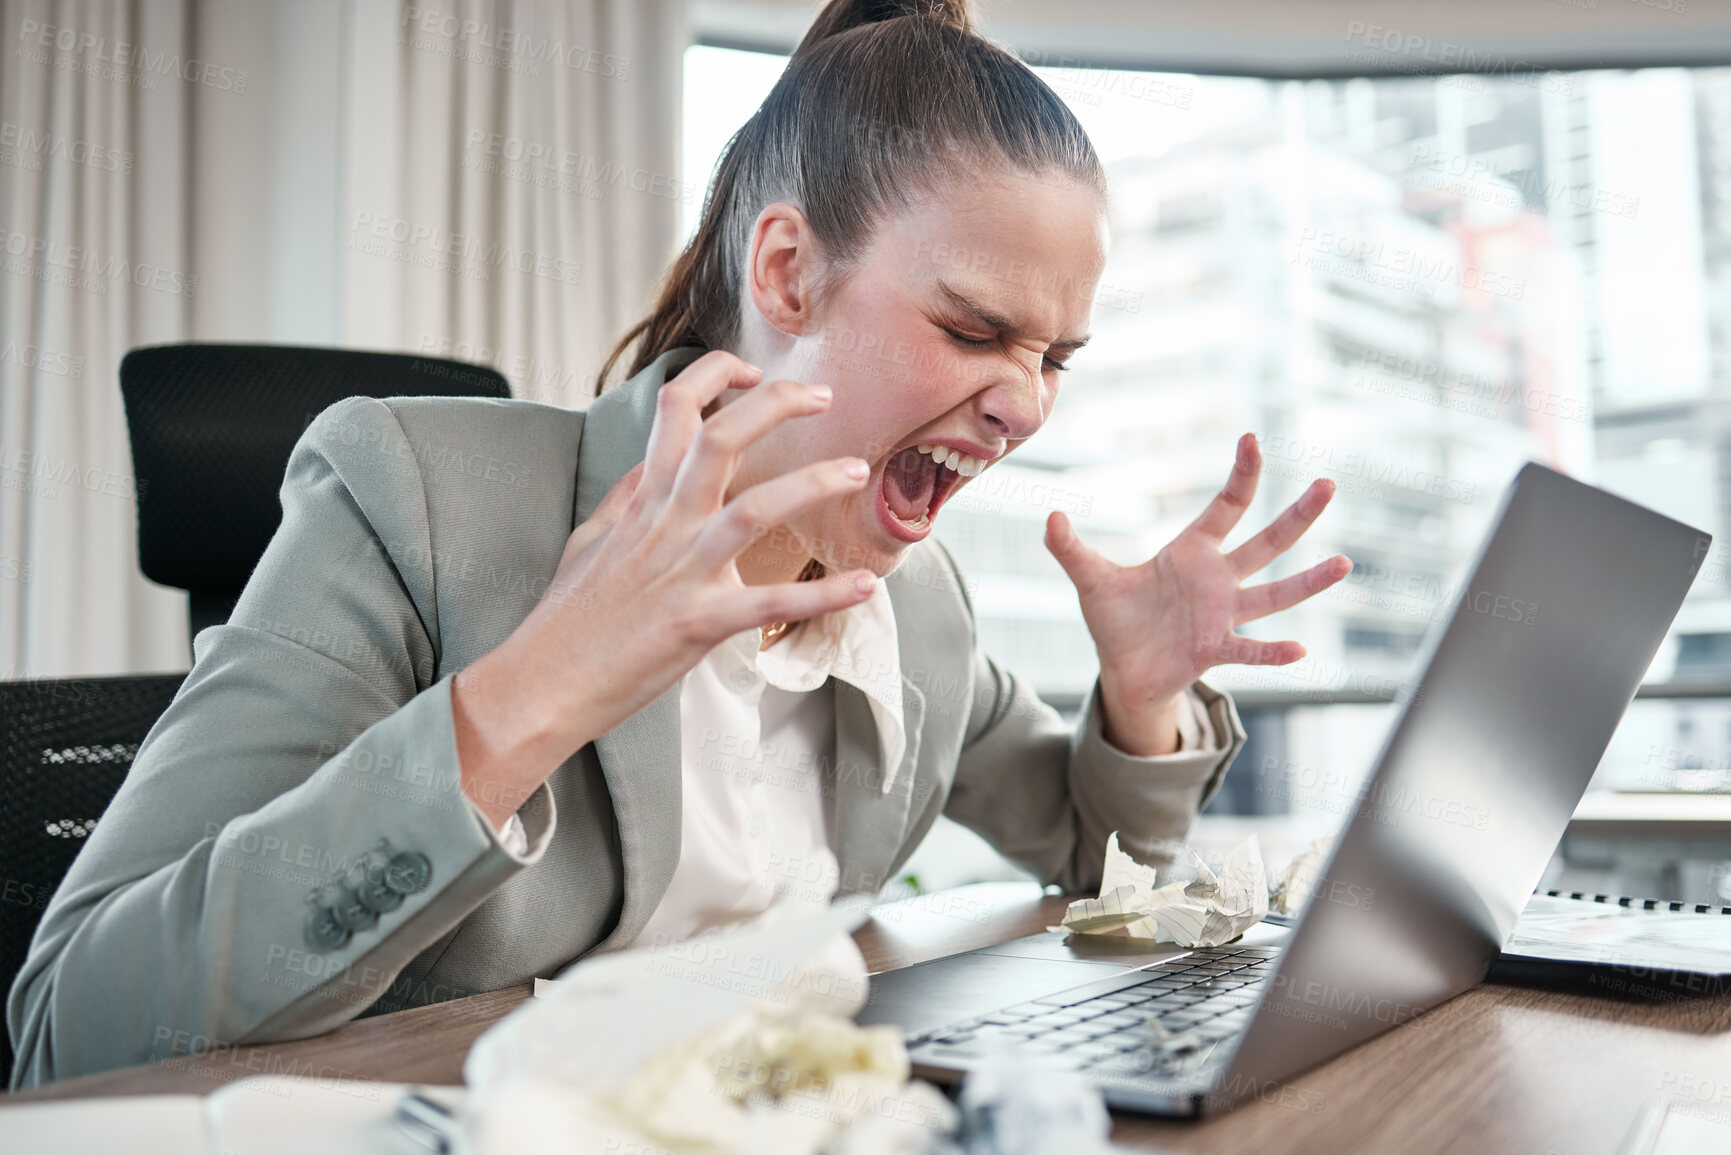 Buy stock photo Shot of a young businesswoman yelling while using a laptop in an office at work